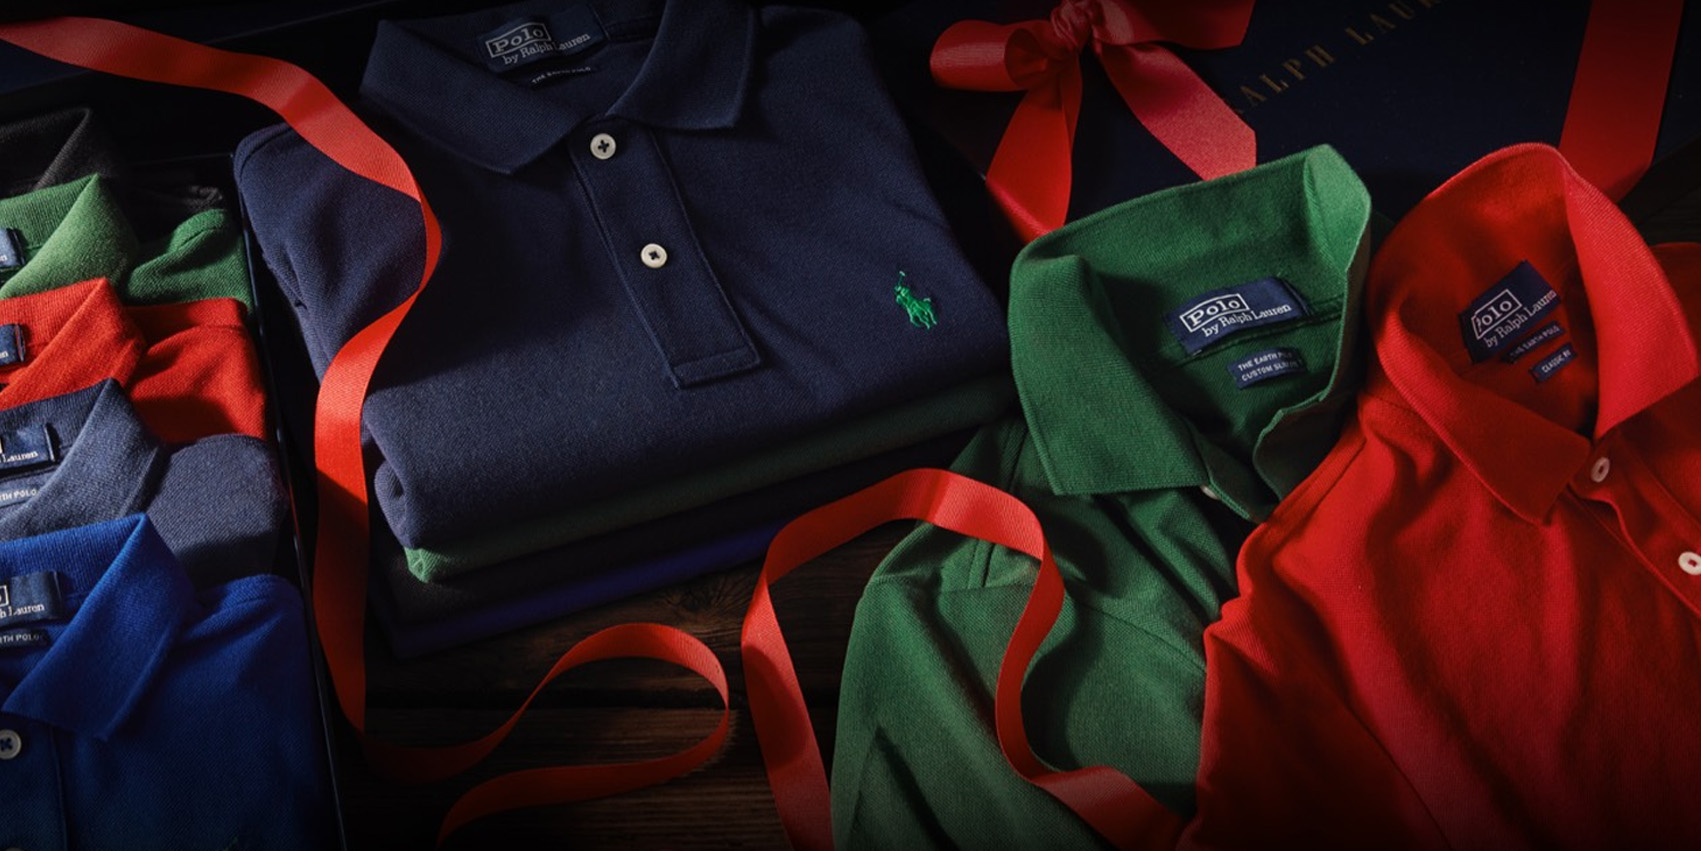 Ralph Lauren's Holiday Gift Guide is full of classic they will enjo -  9to5Toys